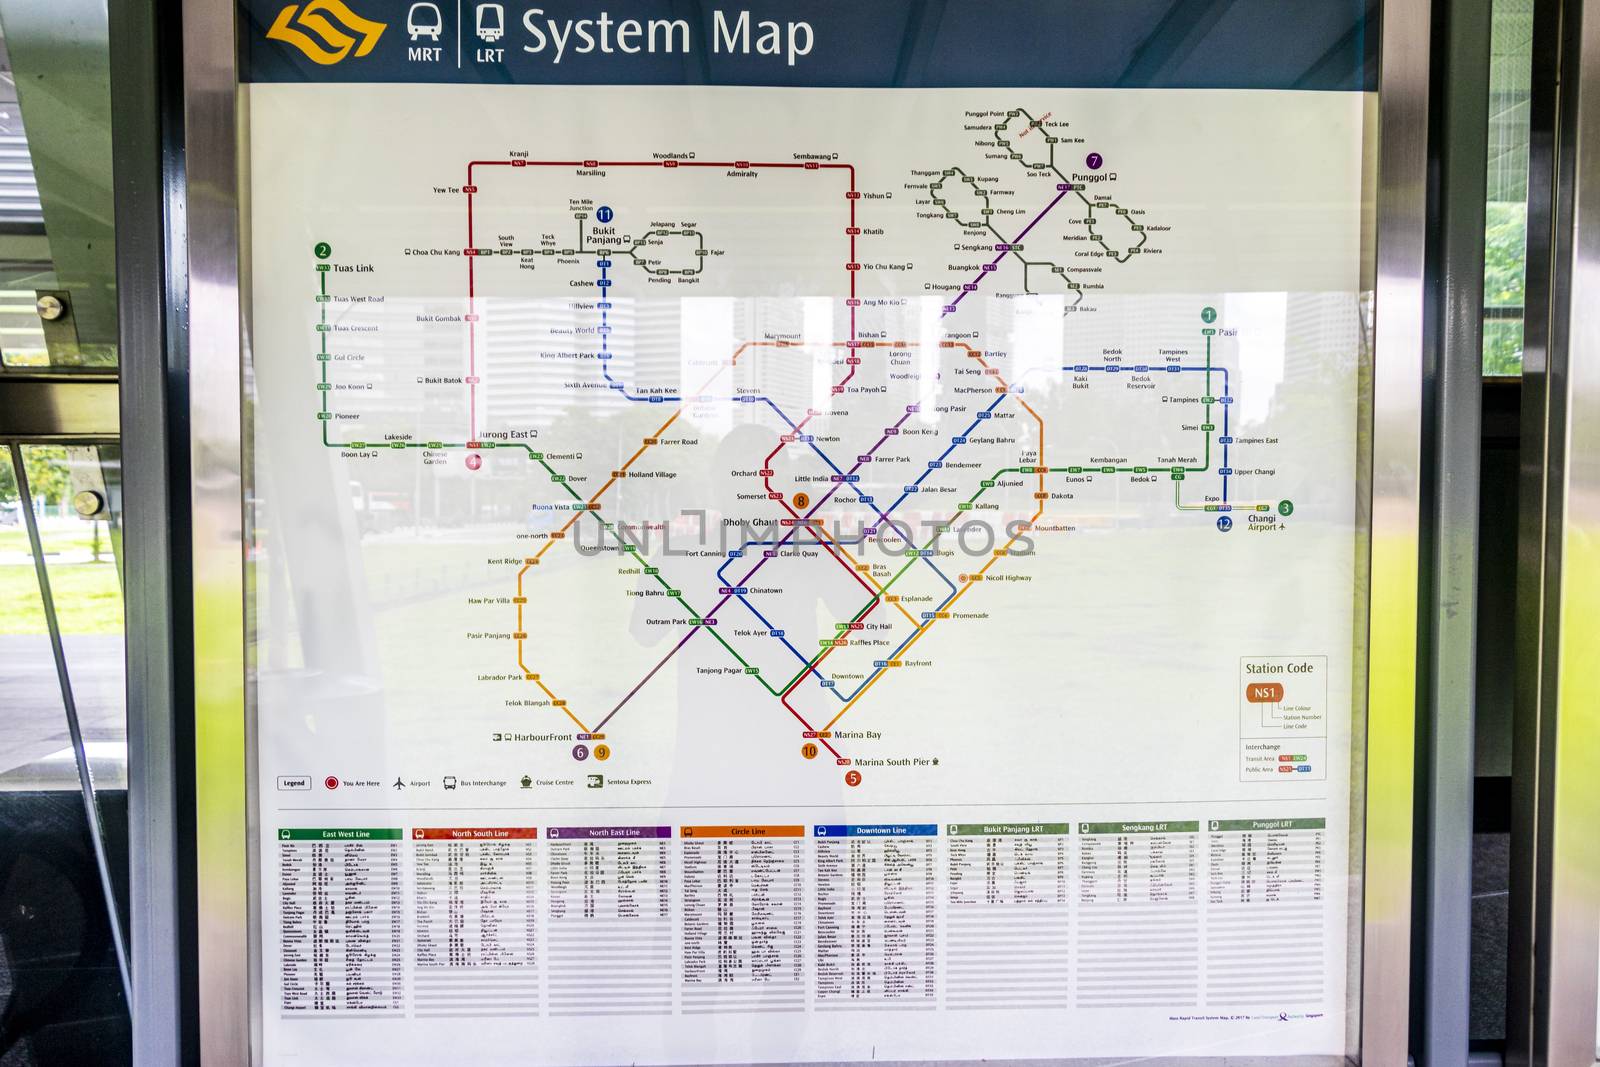 MRT and LRT System Map for metro and subway stops in Singapore.